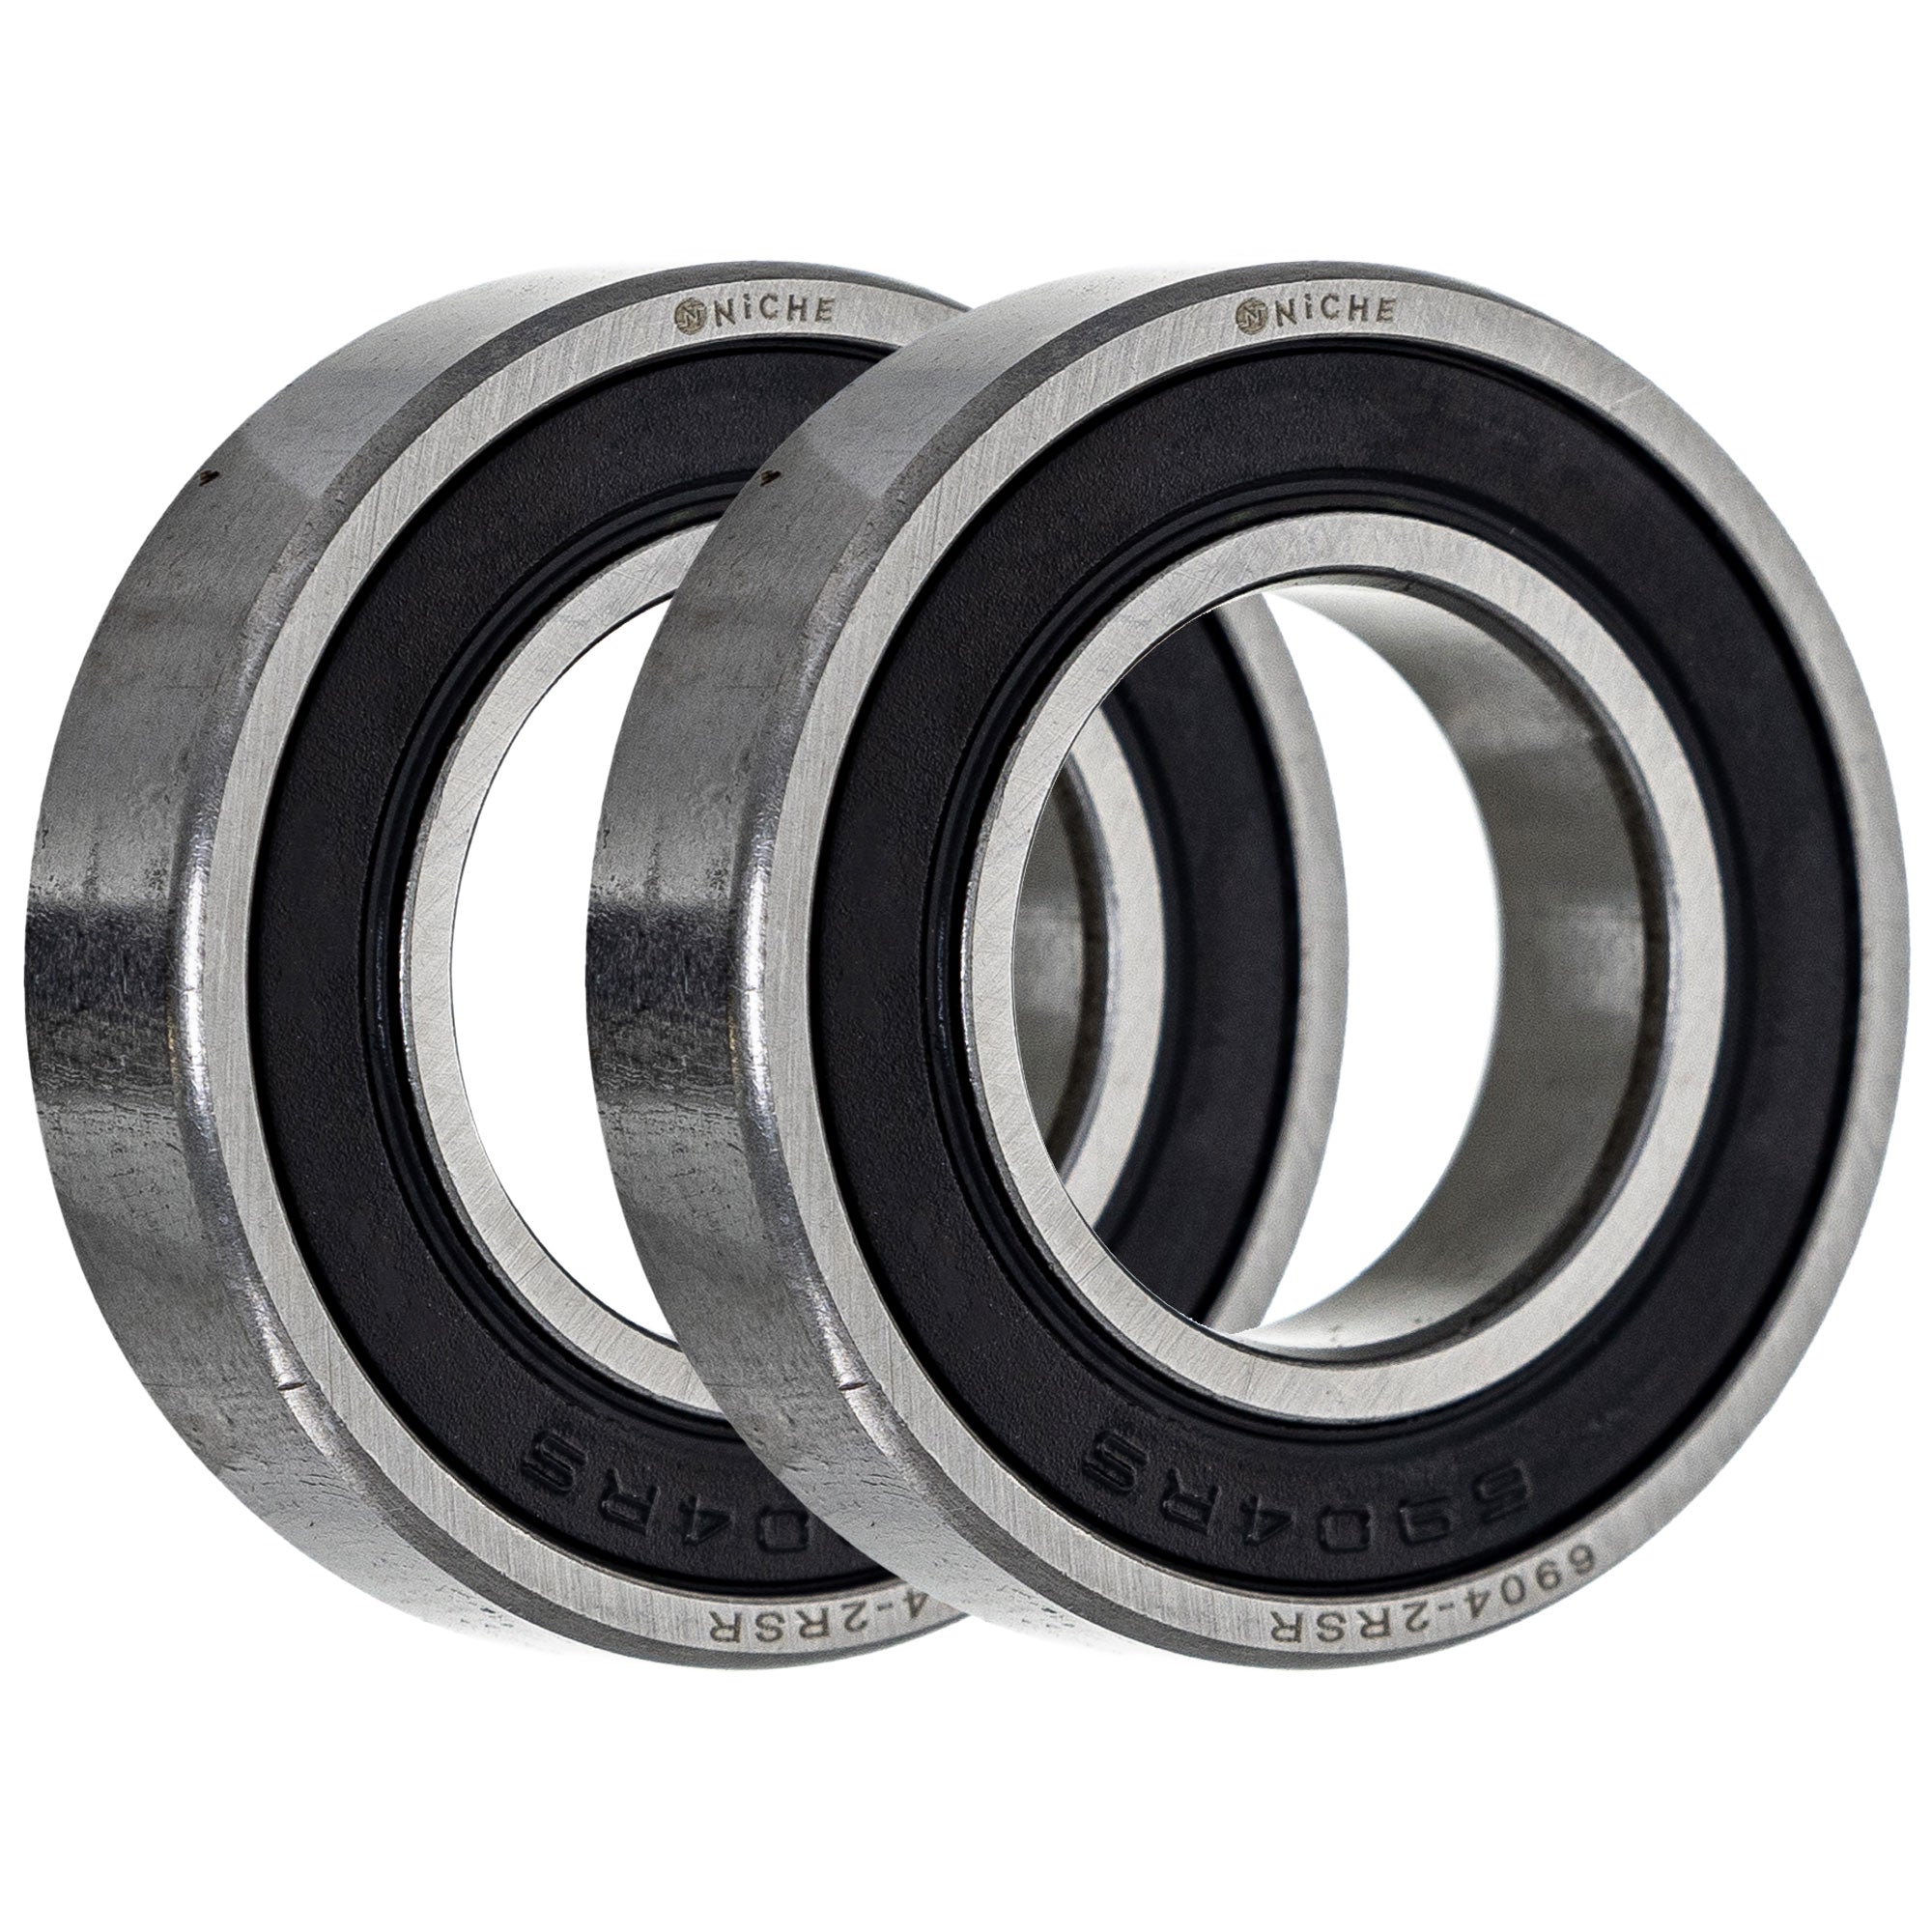 Single Row, Deep Groove, Ball Bearing Pack of 2 2-Pack for zOTHER WR450F WR426F WR400F NICHE 519-CBB2287R